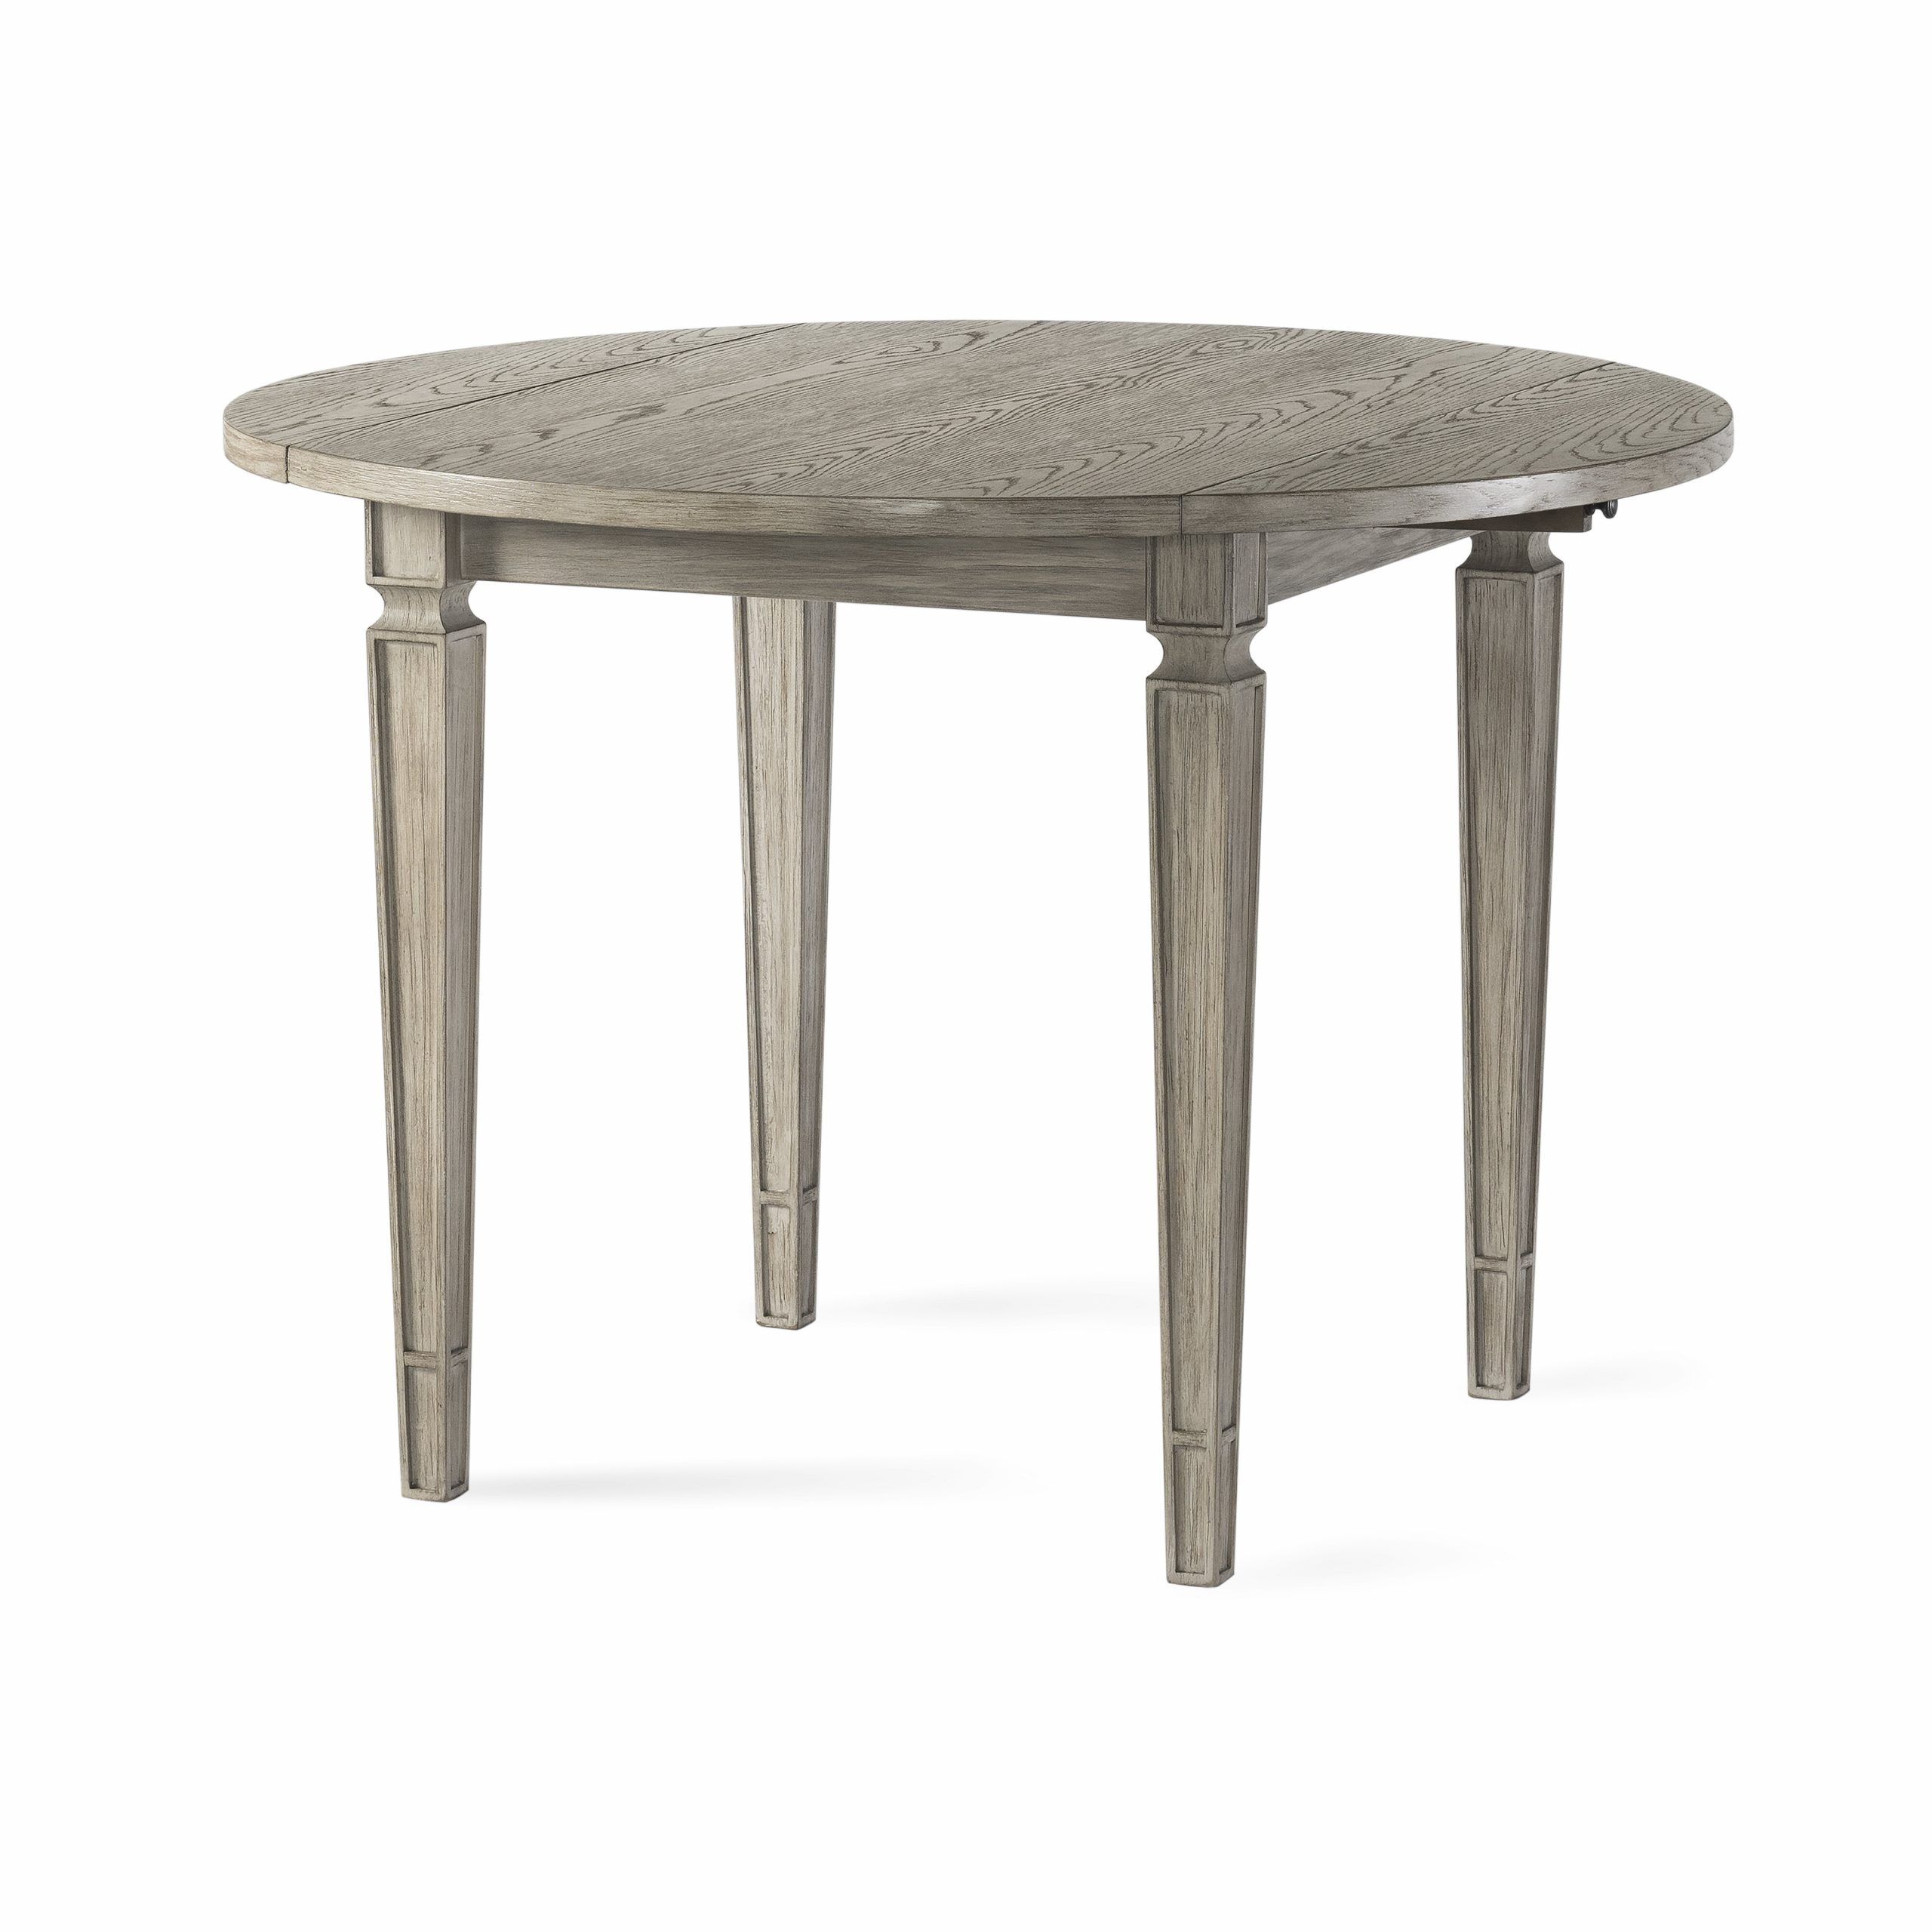 Jewell Drop Leaf Dining Table Intended For Popular Cleary Oval Dining Pedestal Tables (View 17 of 25)